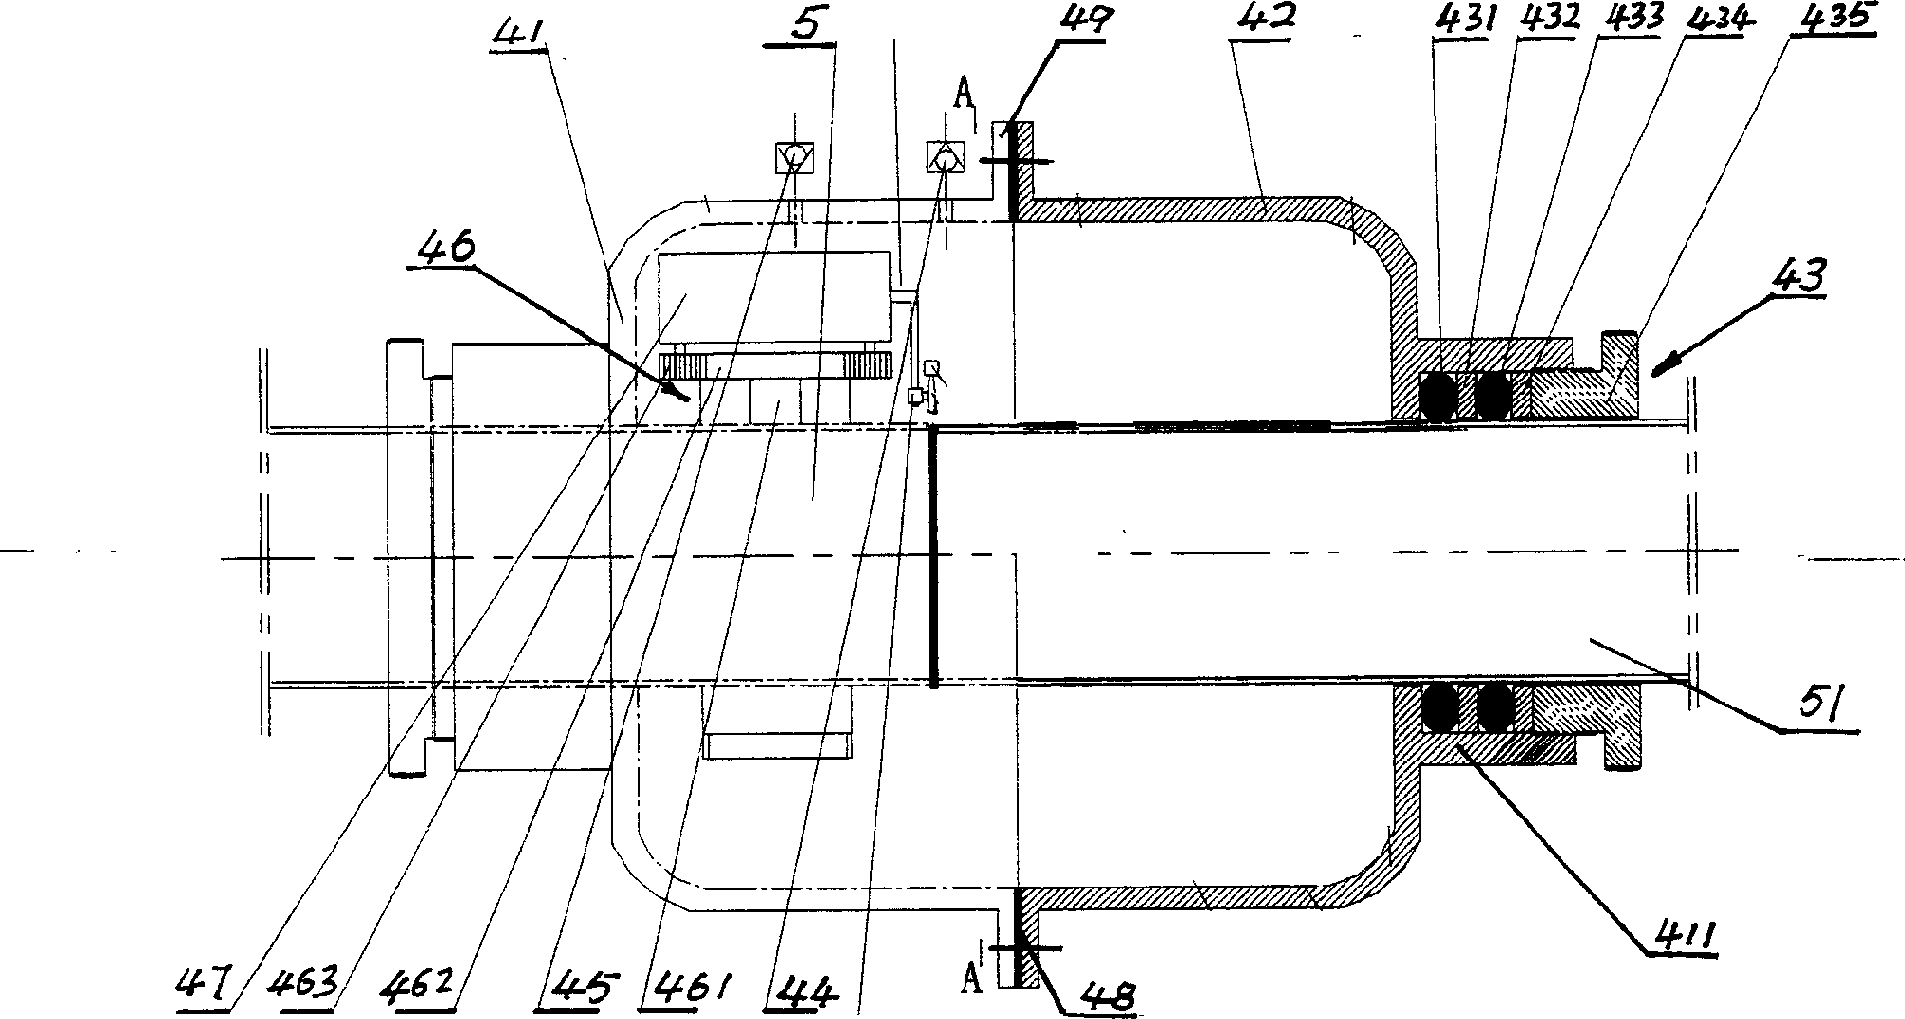 'cabin inside cabin' type working space for welding subwater pipeline in dry mode and under normal pressure